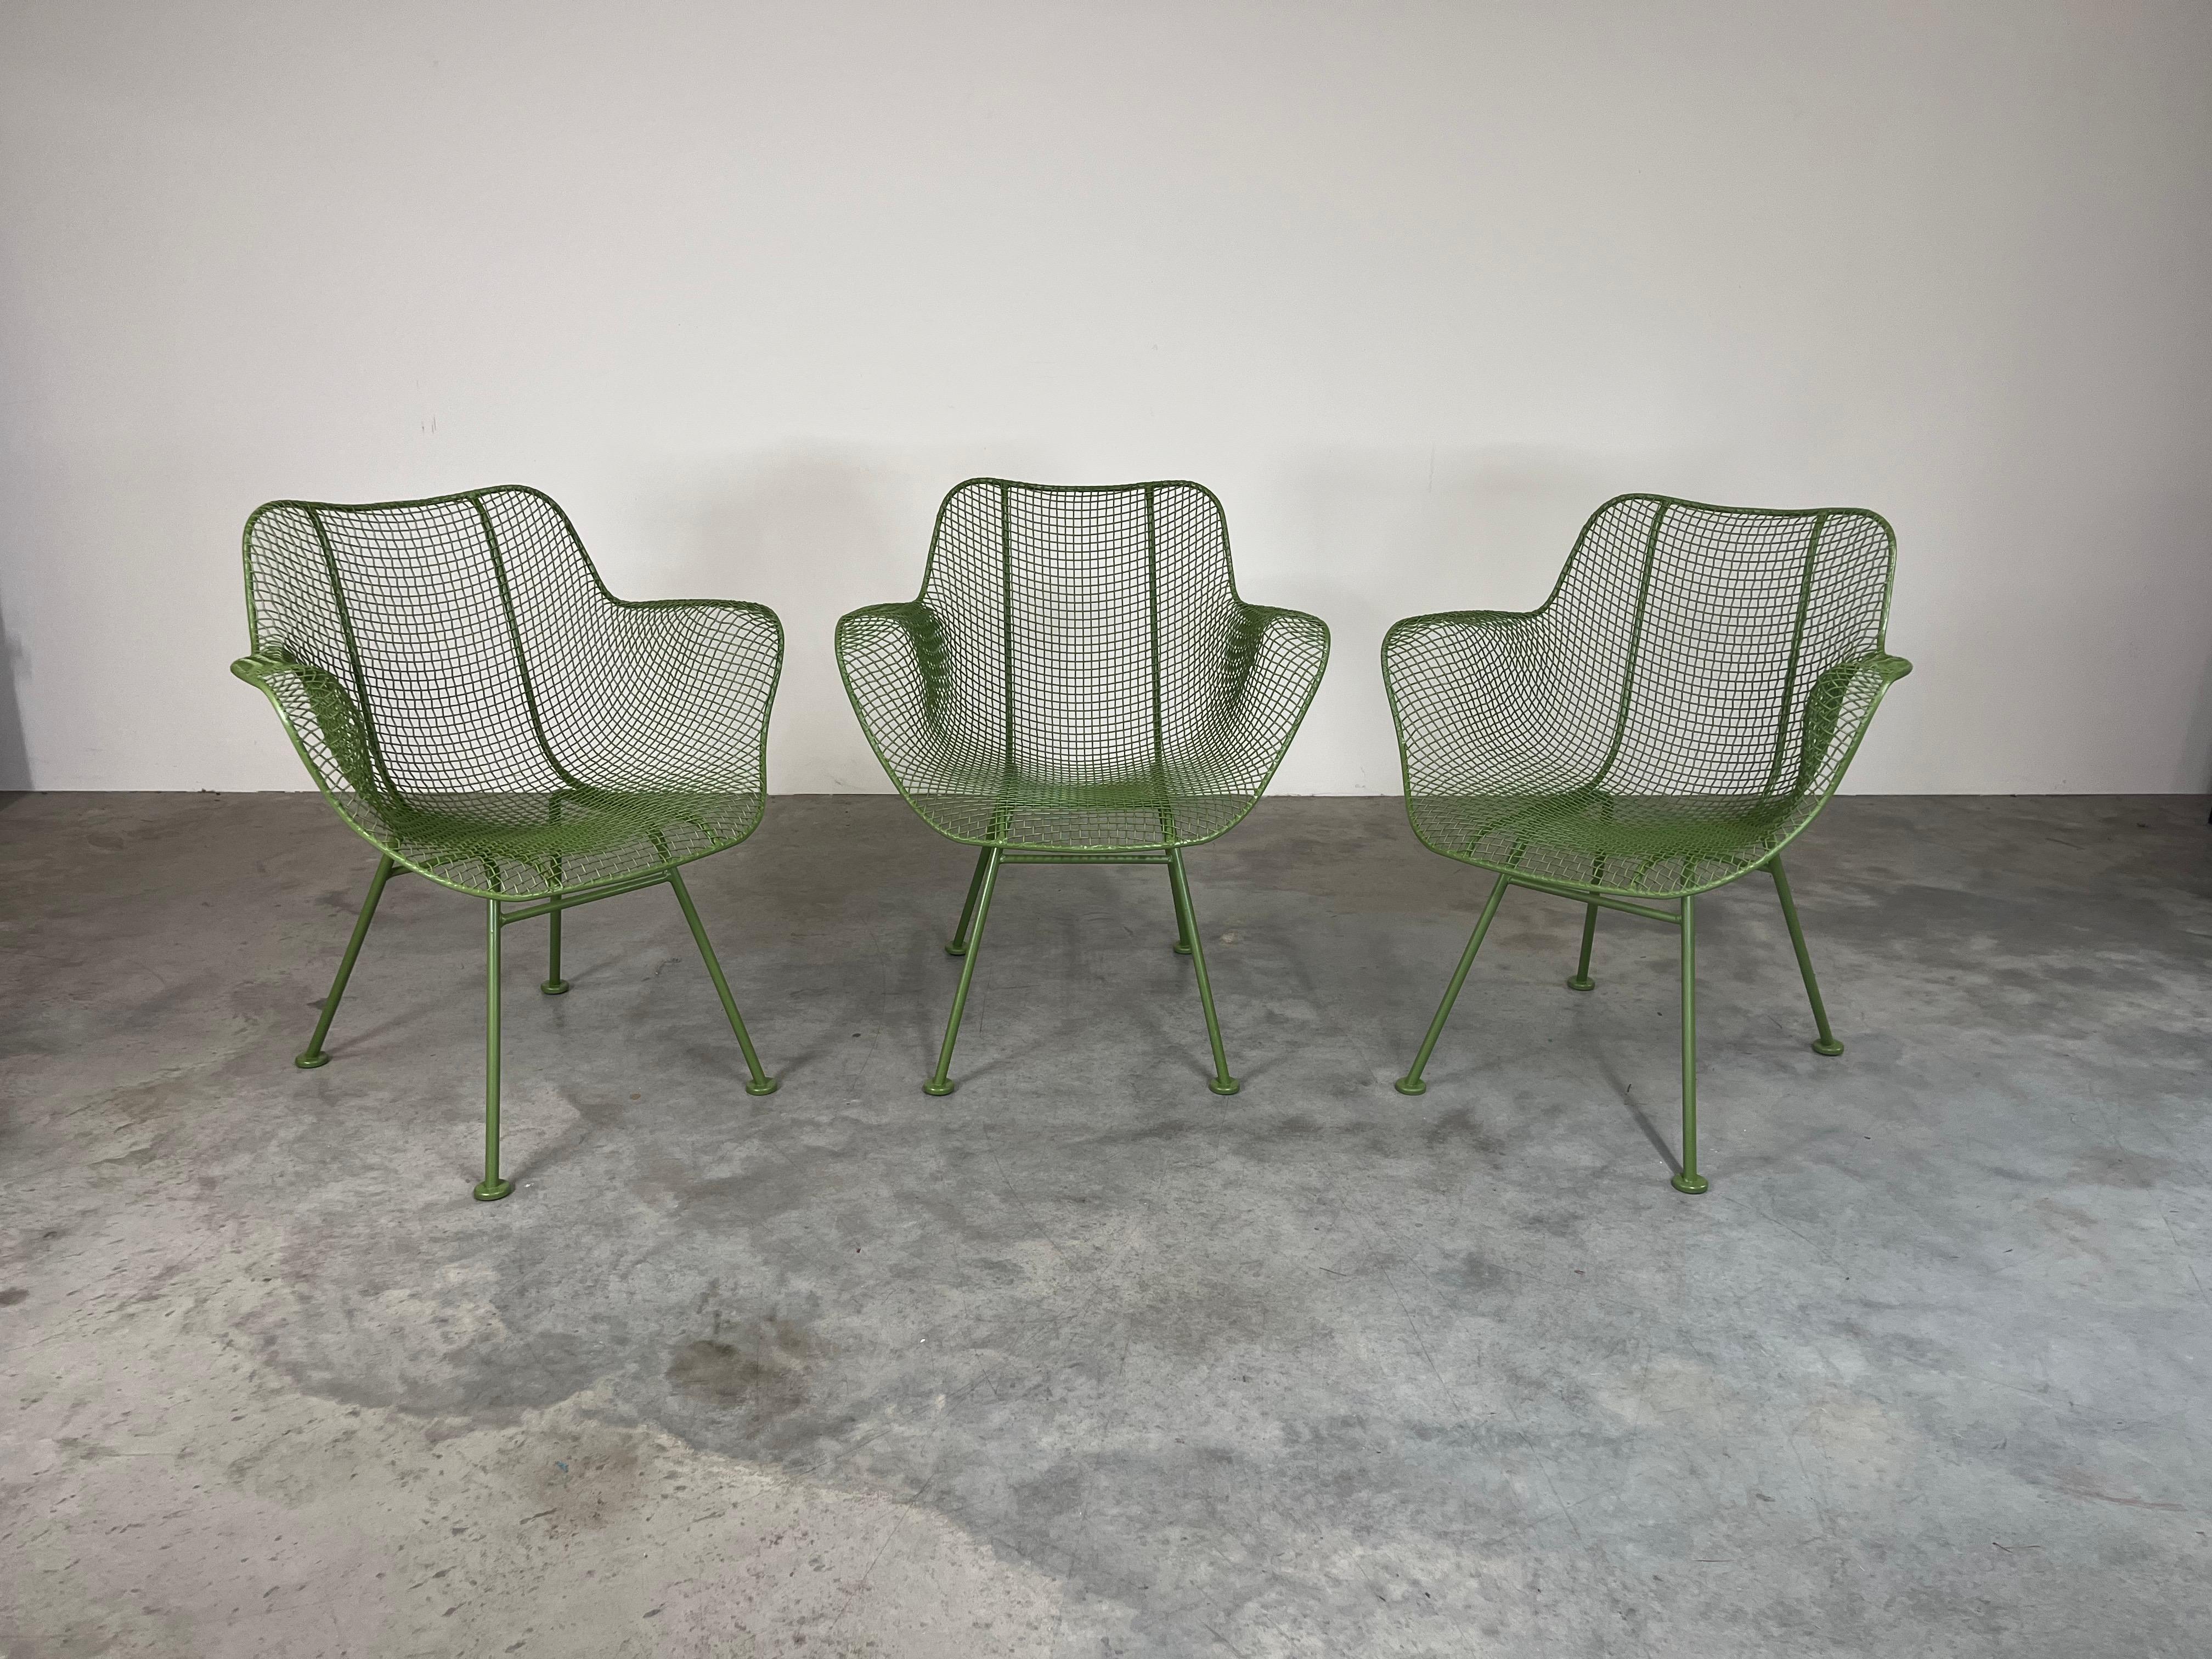 A beautiful set of 6 vintage Russell Woodard Sculptura patio armchairs in rare green. Very nice condition having no breaks or weakness. 2 of the chairs retain their original 